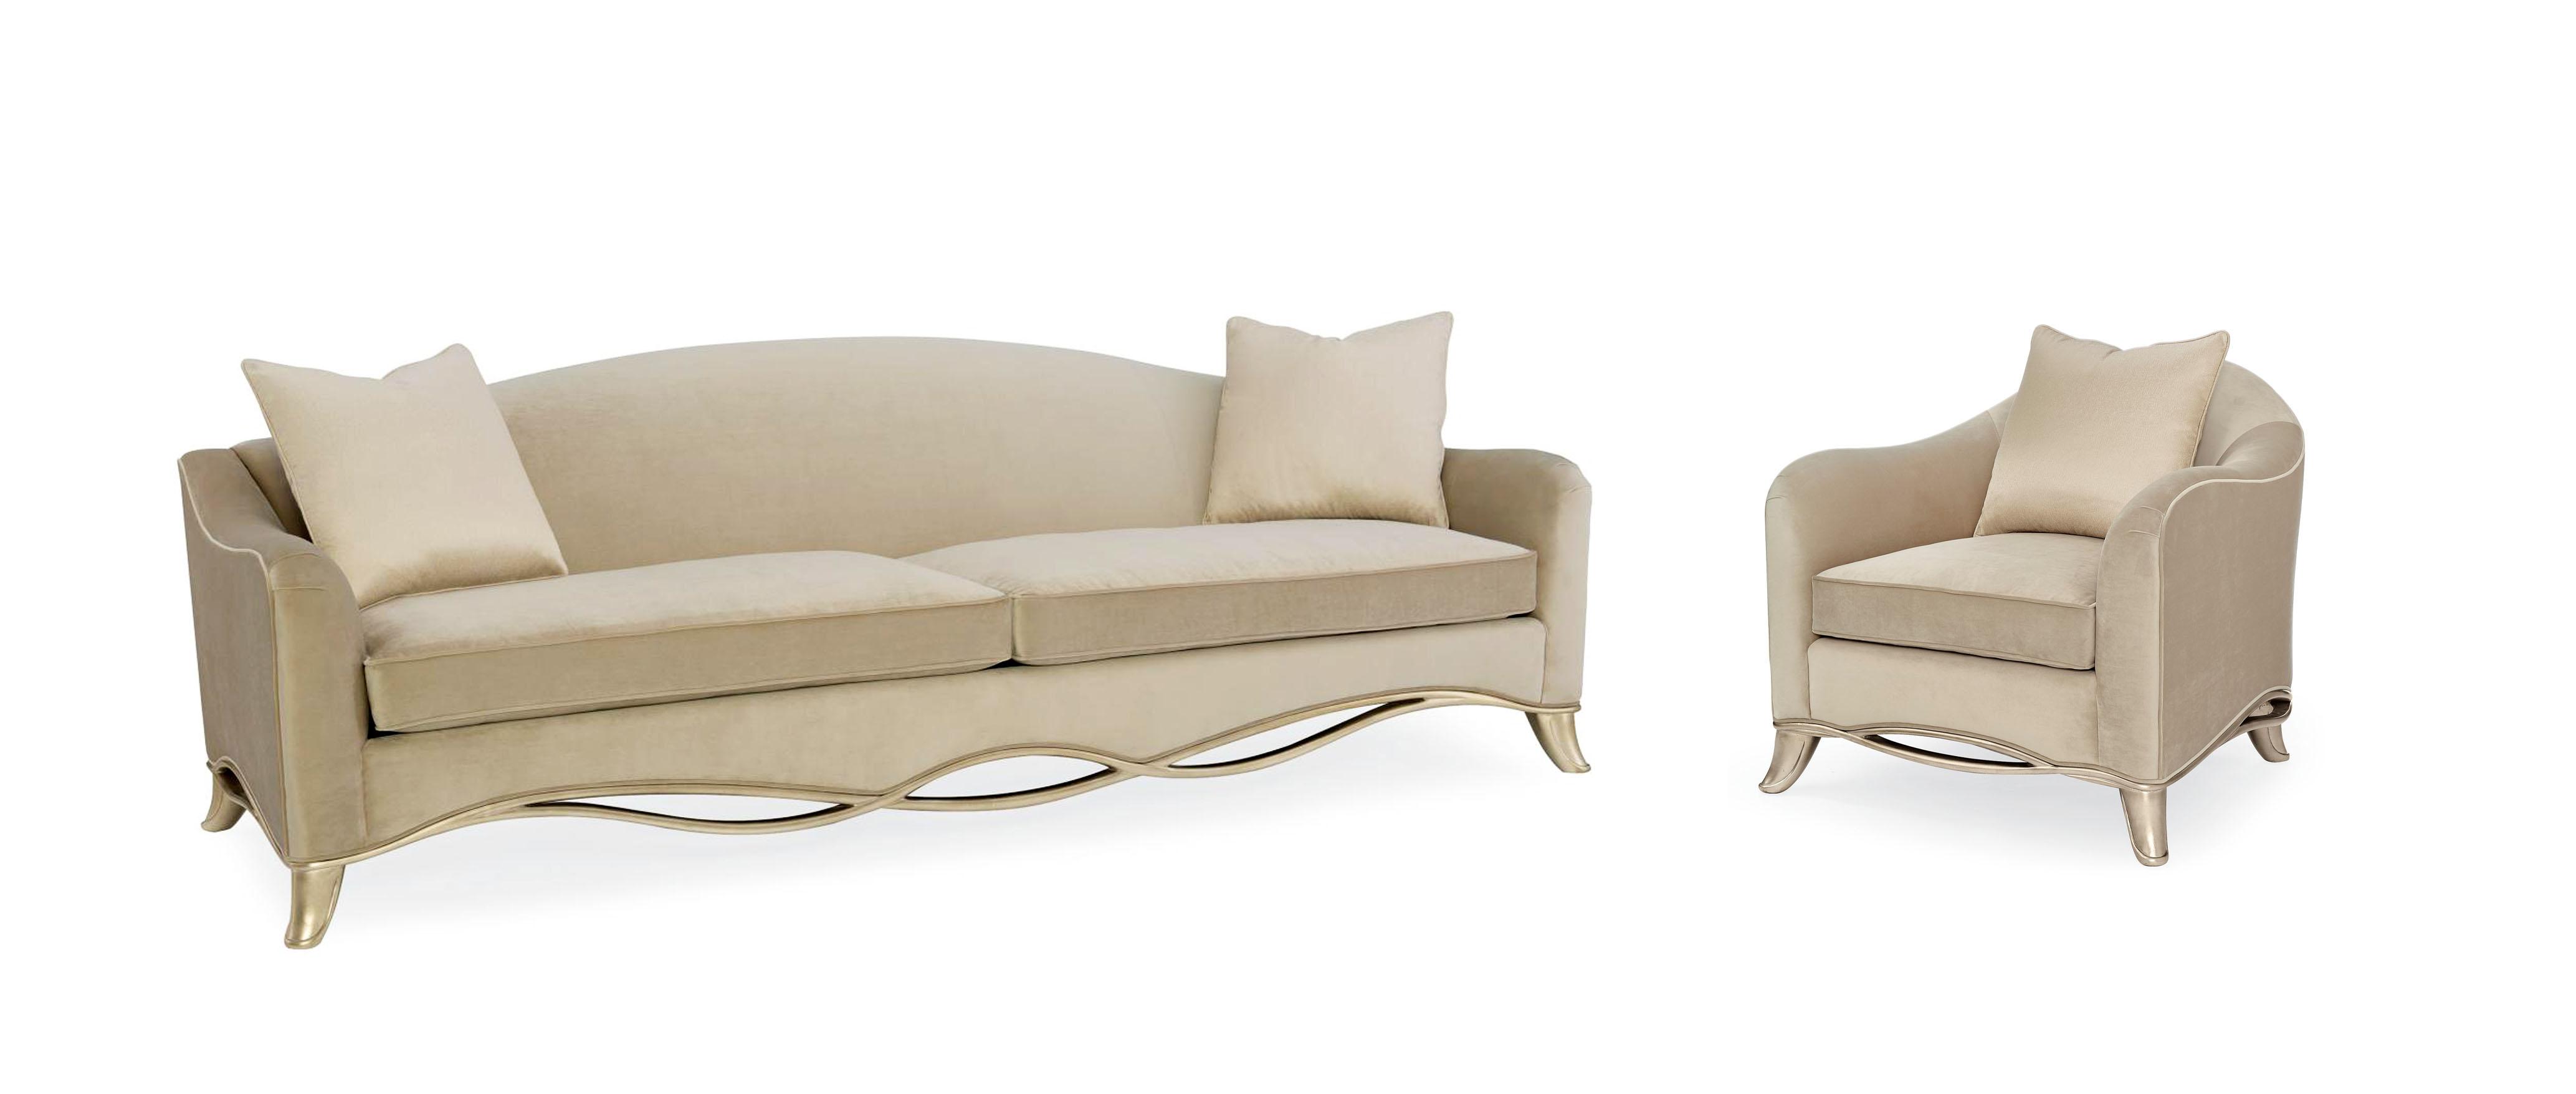 Traditional Sofa and Chair THE RIBBON SOFA SGU-416-013-A-Set-2 in Gold, Beige Velvet